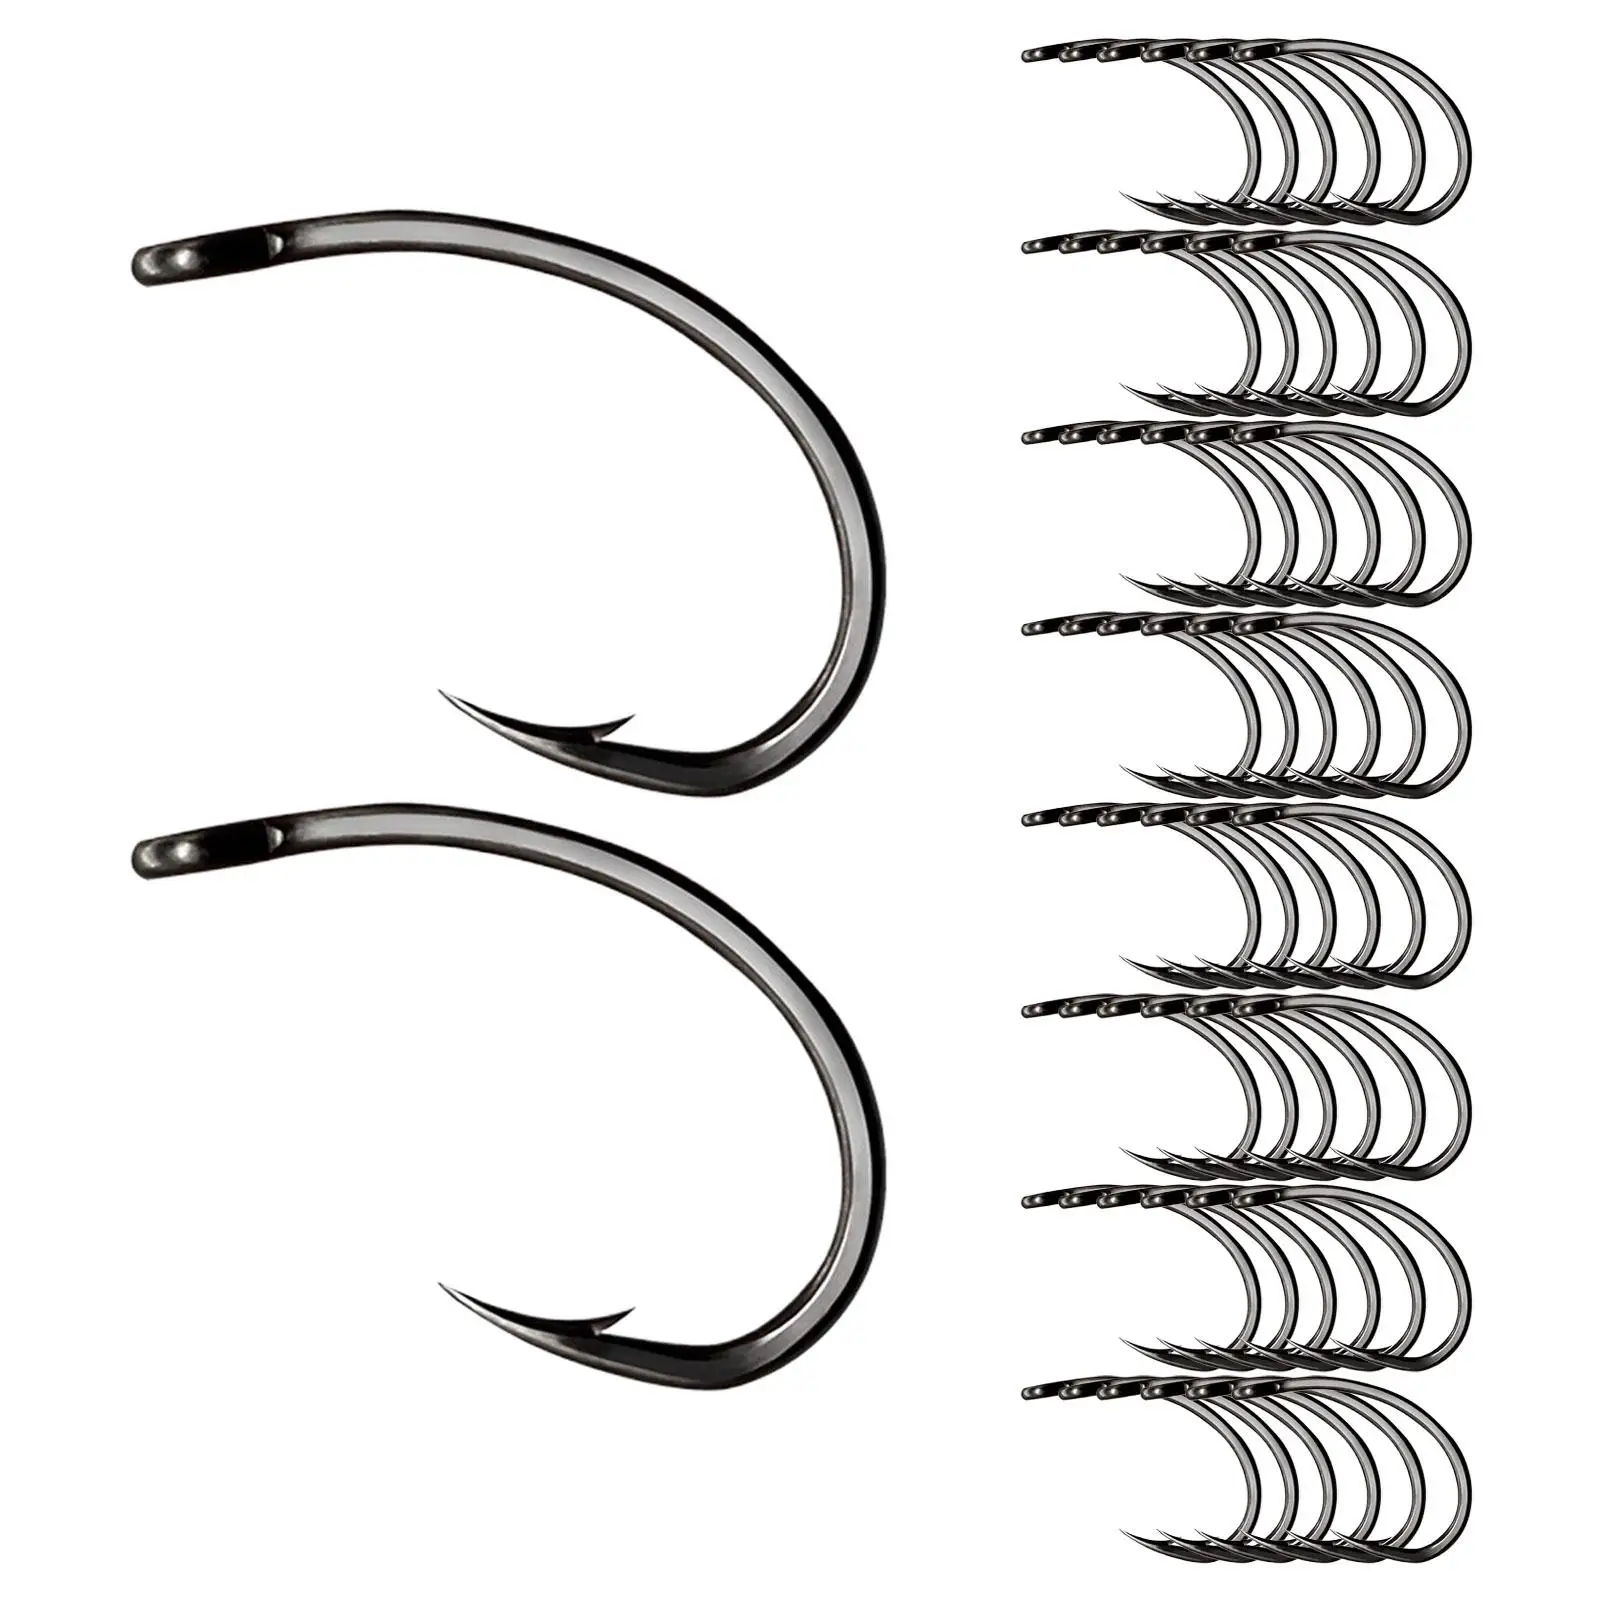 50x Fly Fishing Hooks for Fishing Lures Saltwater Heavy Duty Versatile Freshwater for Dry Flies Fly Hooks for Bass Catfish Trout